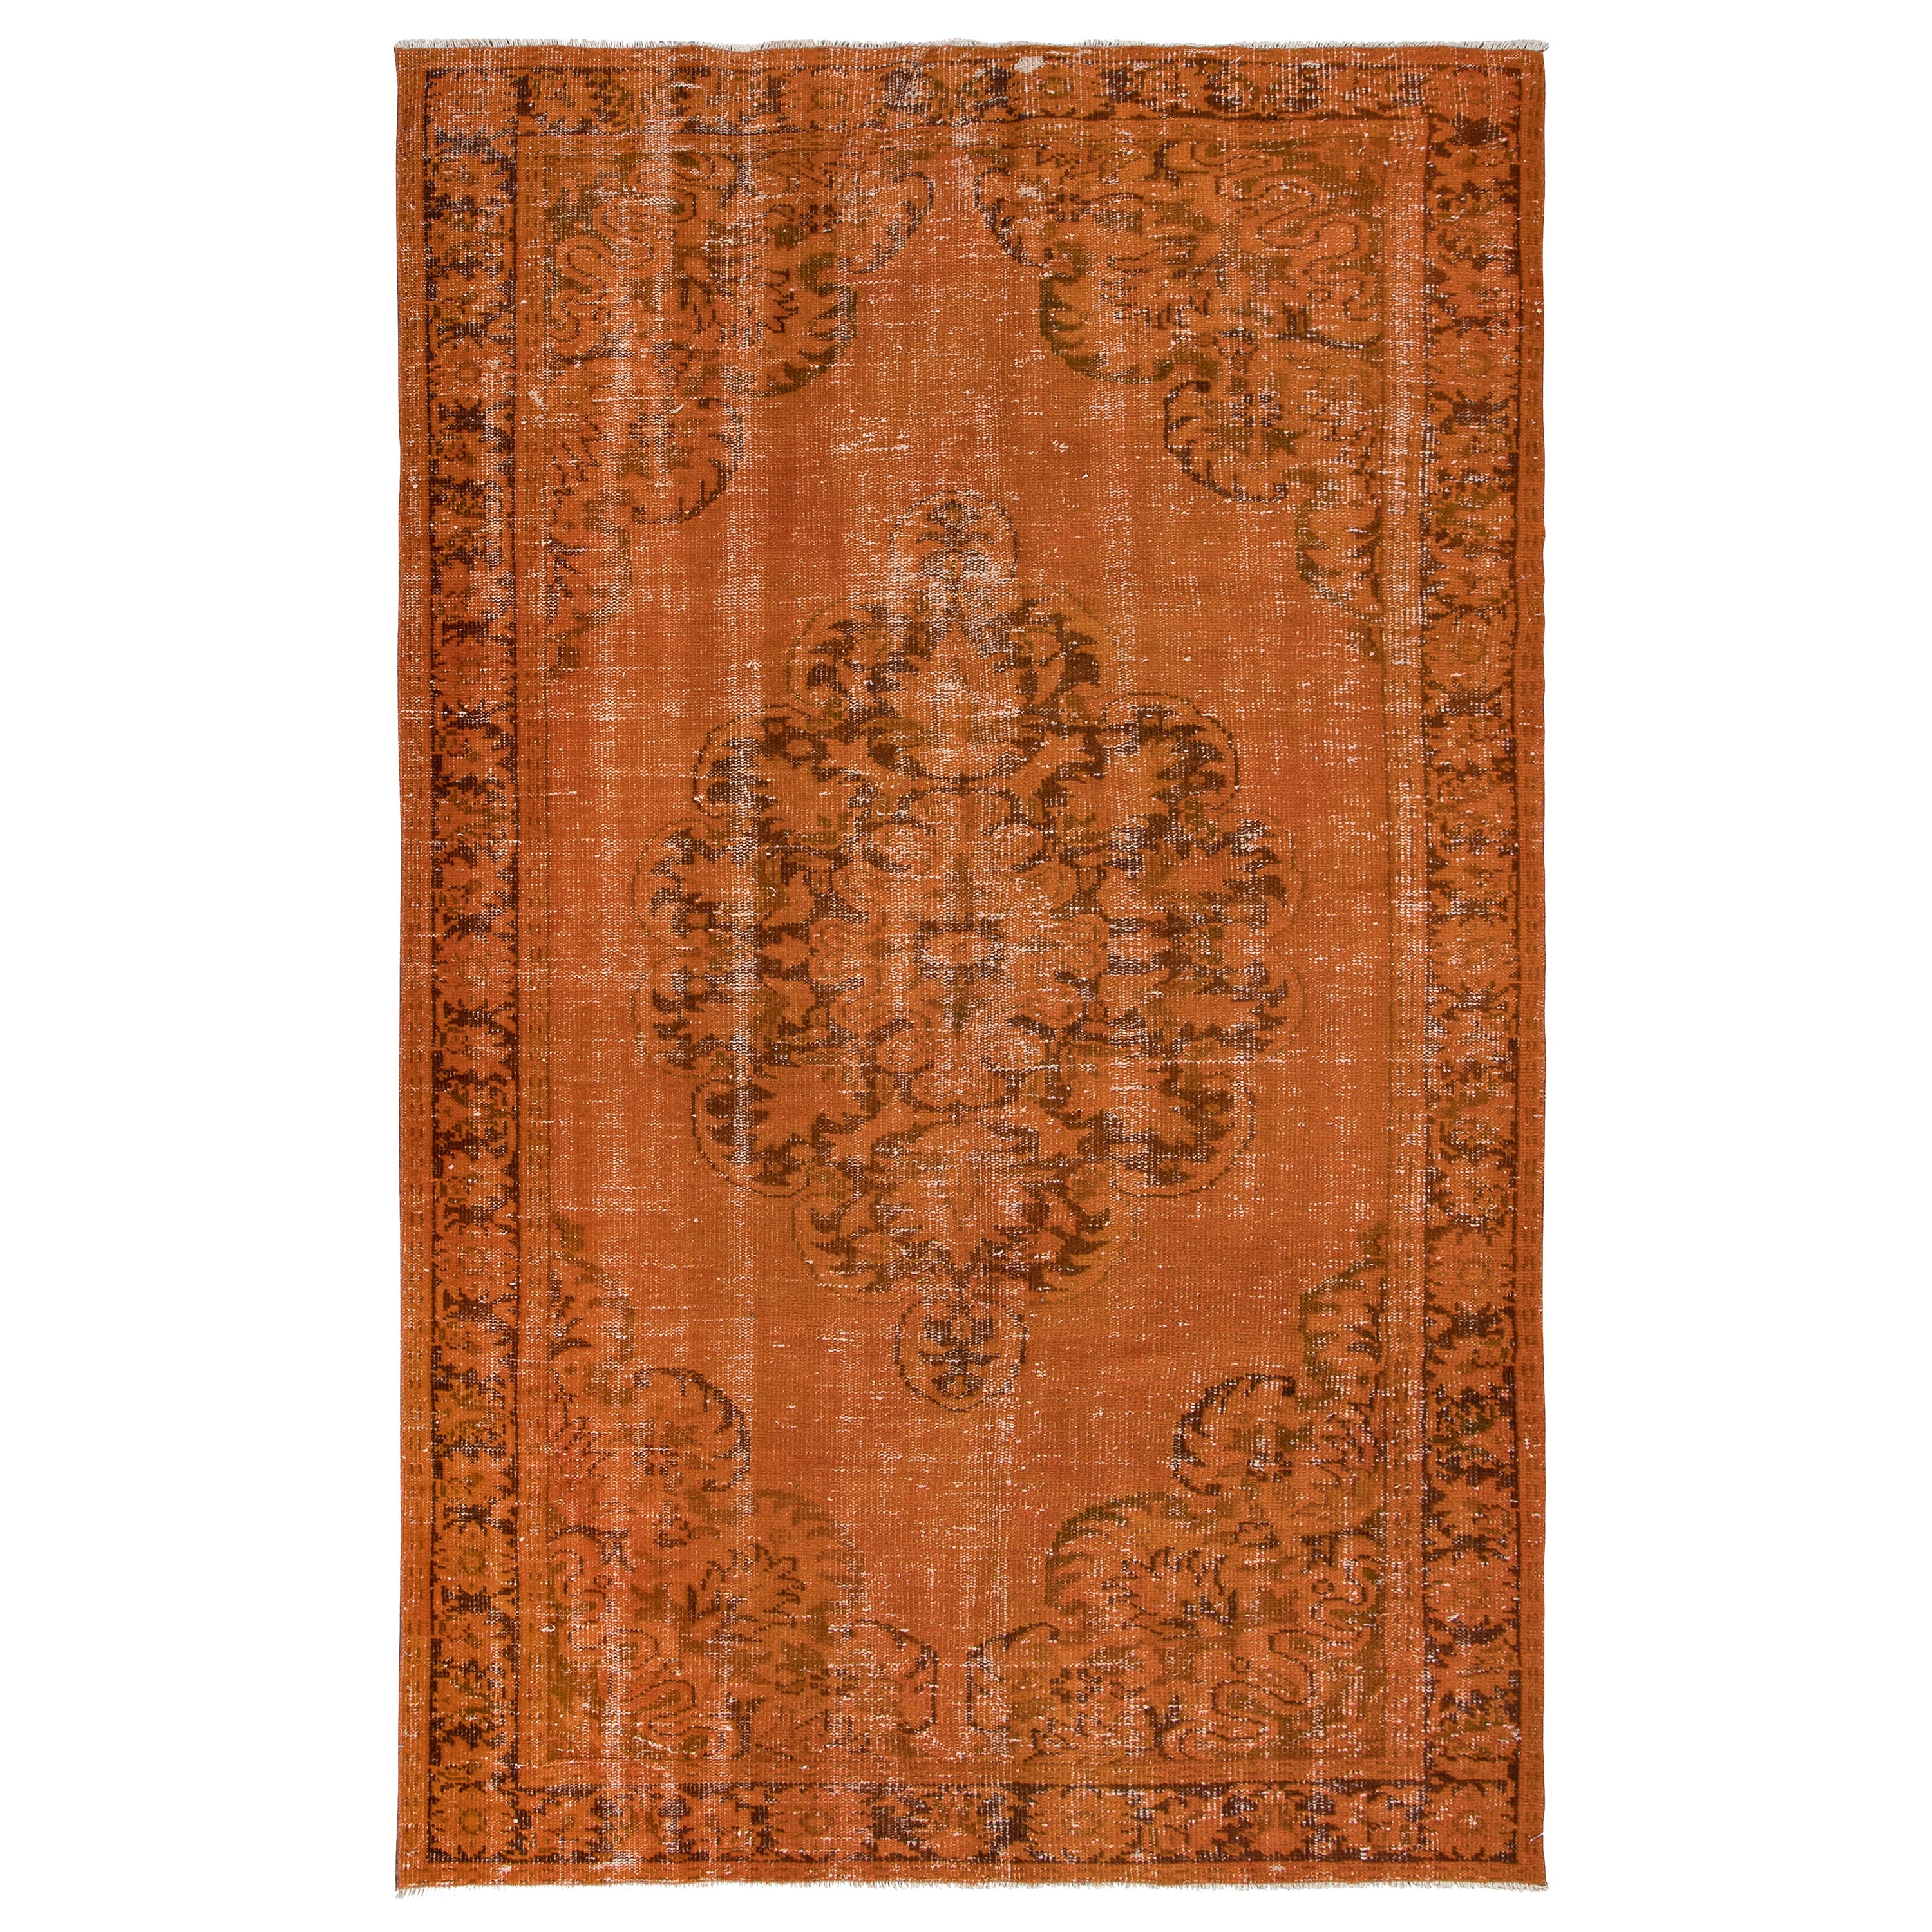 5.8x9.3 Ft Contemporary Living Room Carpet in Orange, Hand-Made Turkish Area Rug For Sale